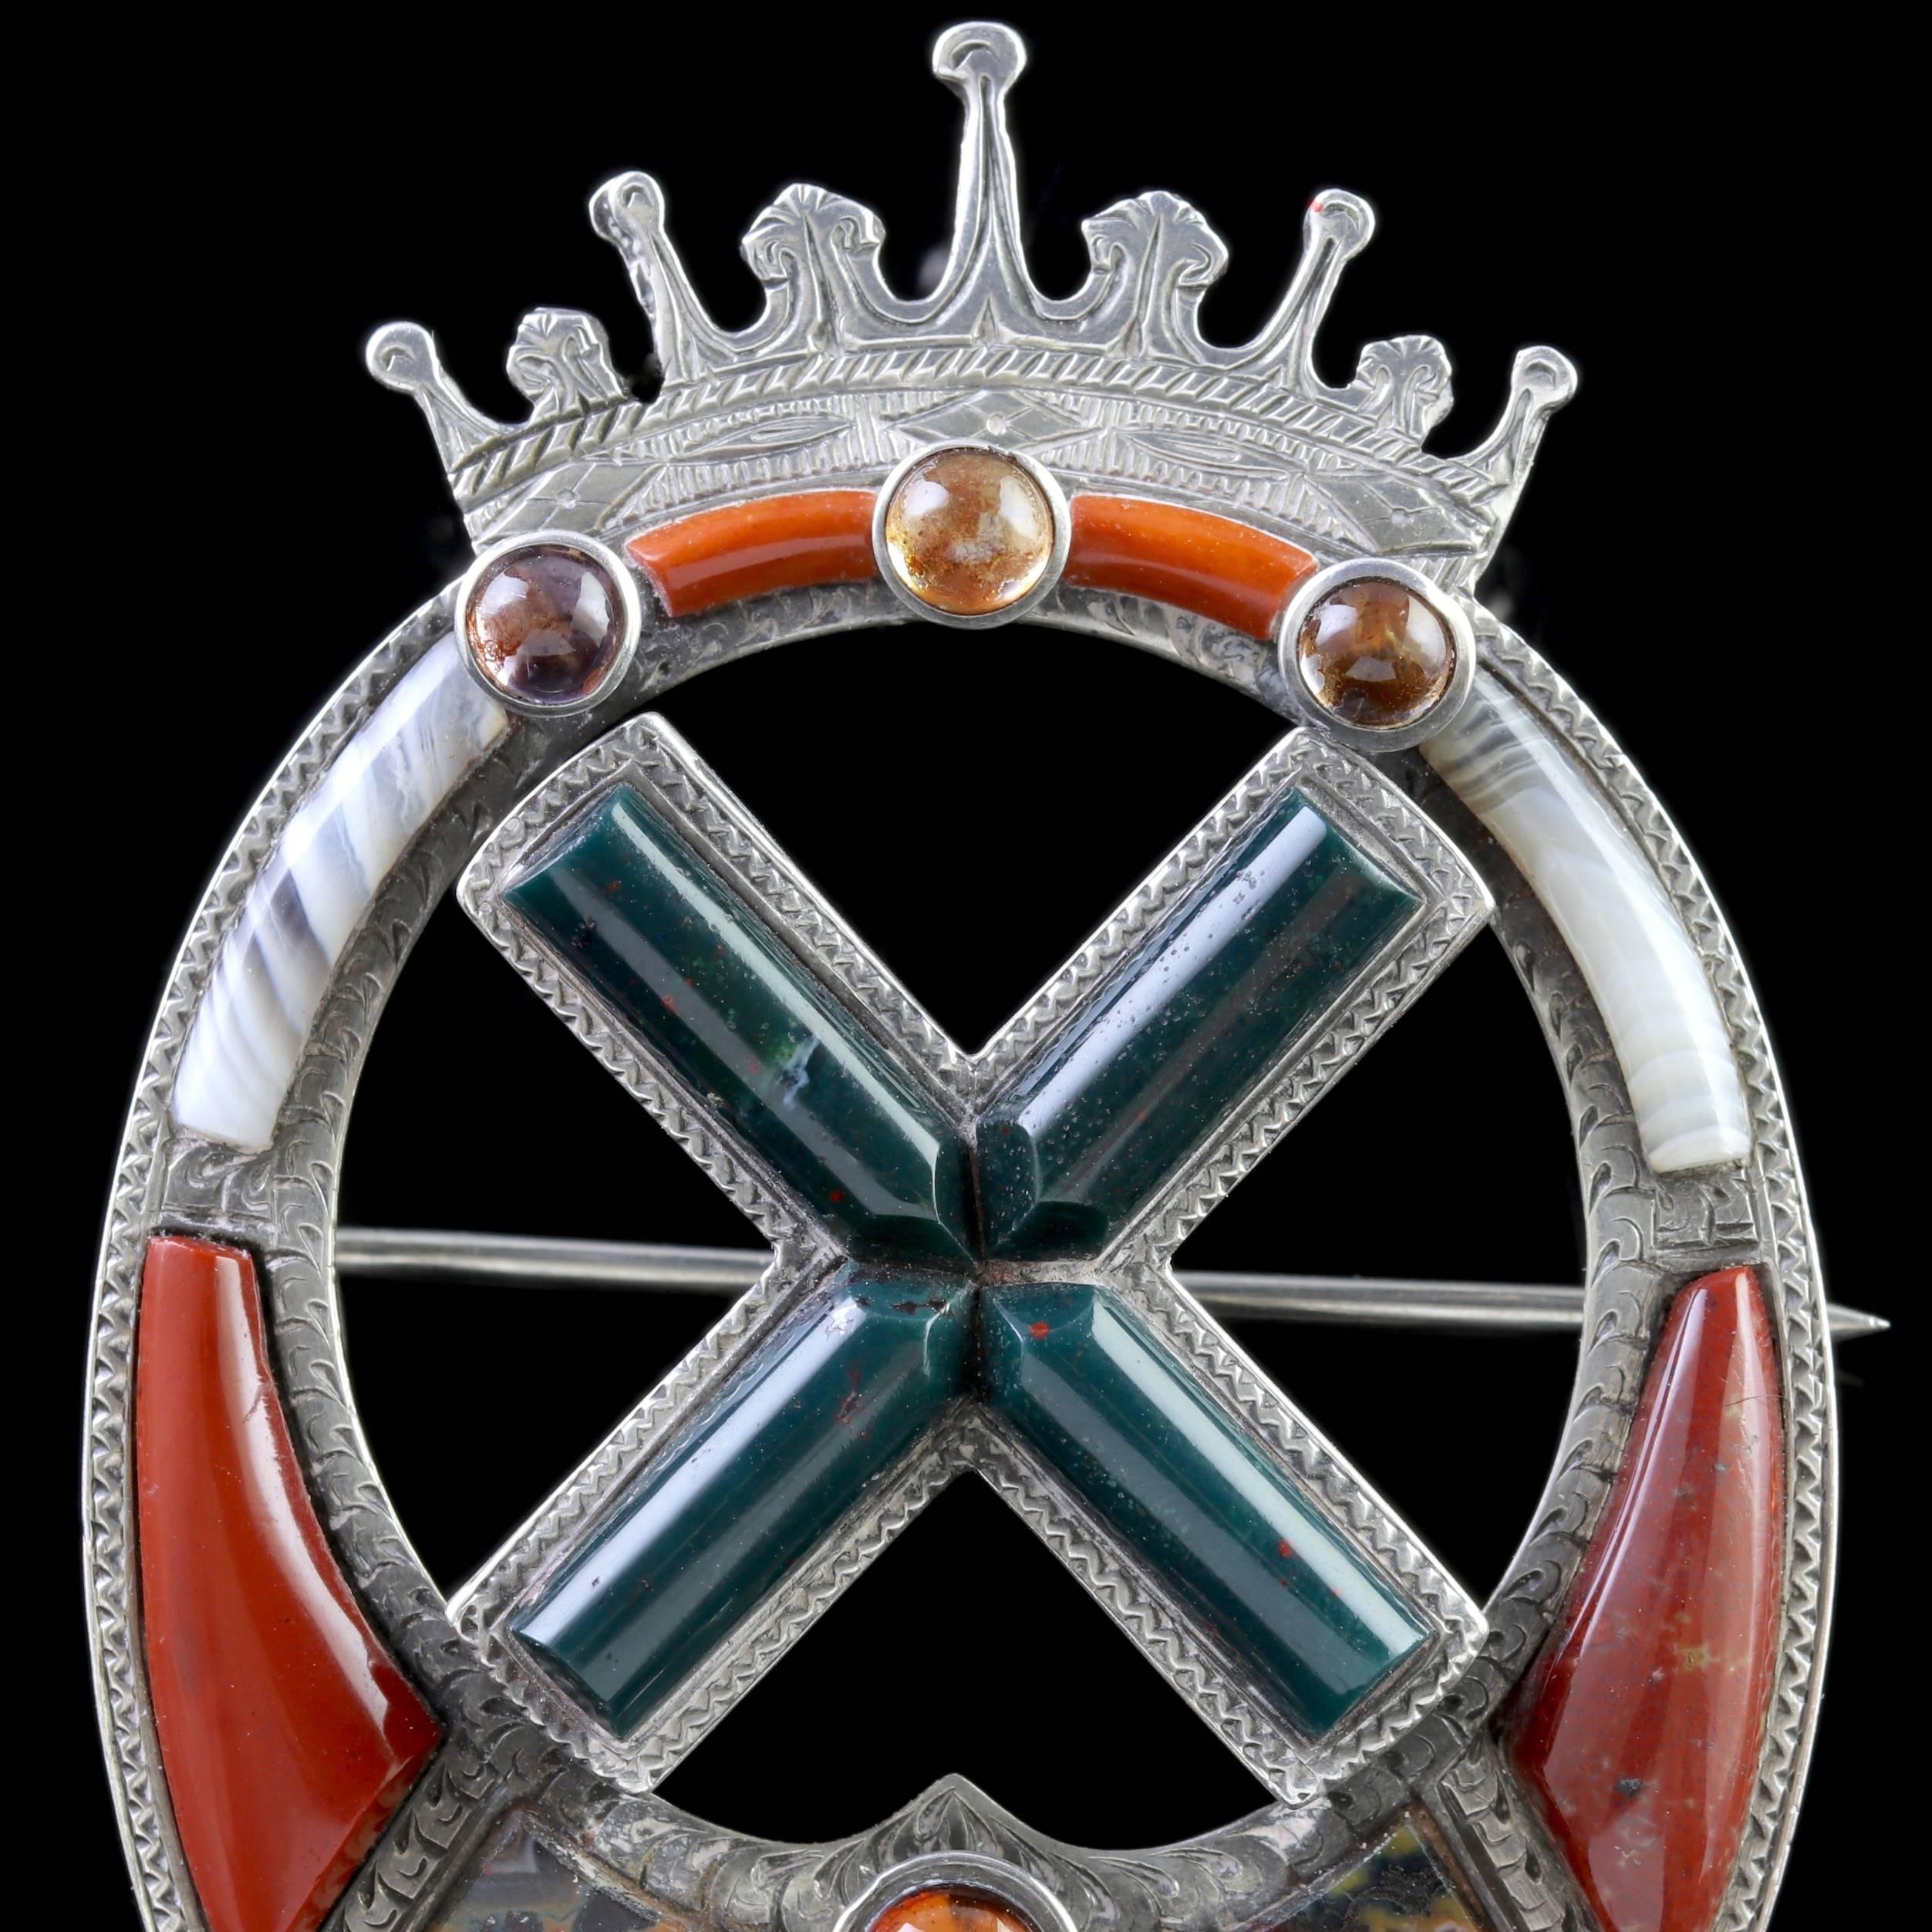 To read more please click continue reading below-

This fabulous Antique Victorian Sterling Silver Scottish Celtic brooch is fully hallmarked April 1874.

A lovely engraved crown adorns this fabulous Celtic brooch with a large Agate cross in the